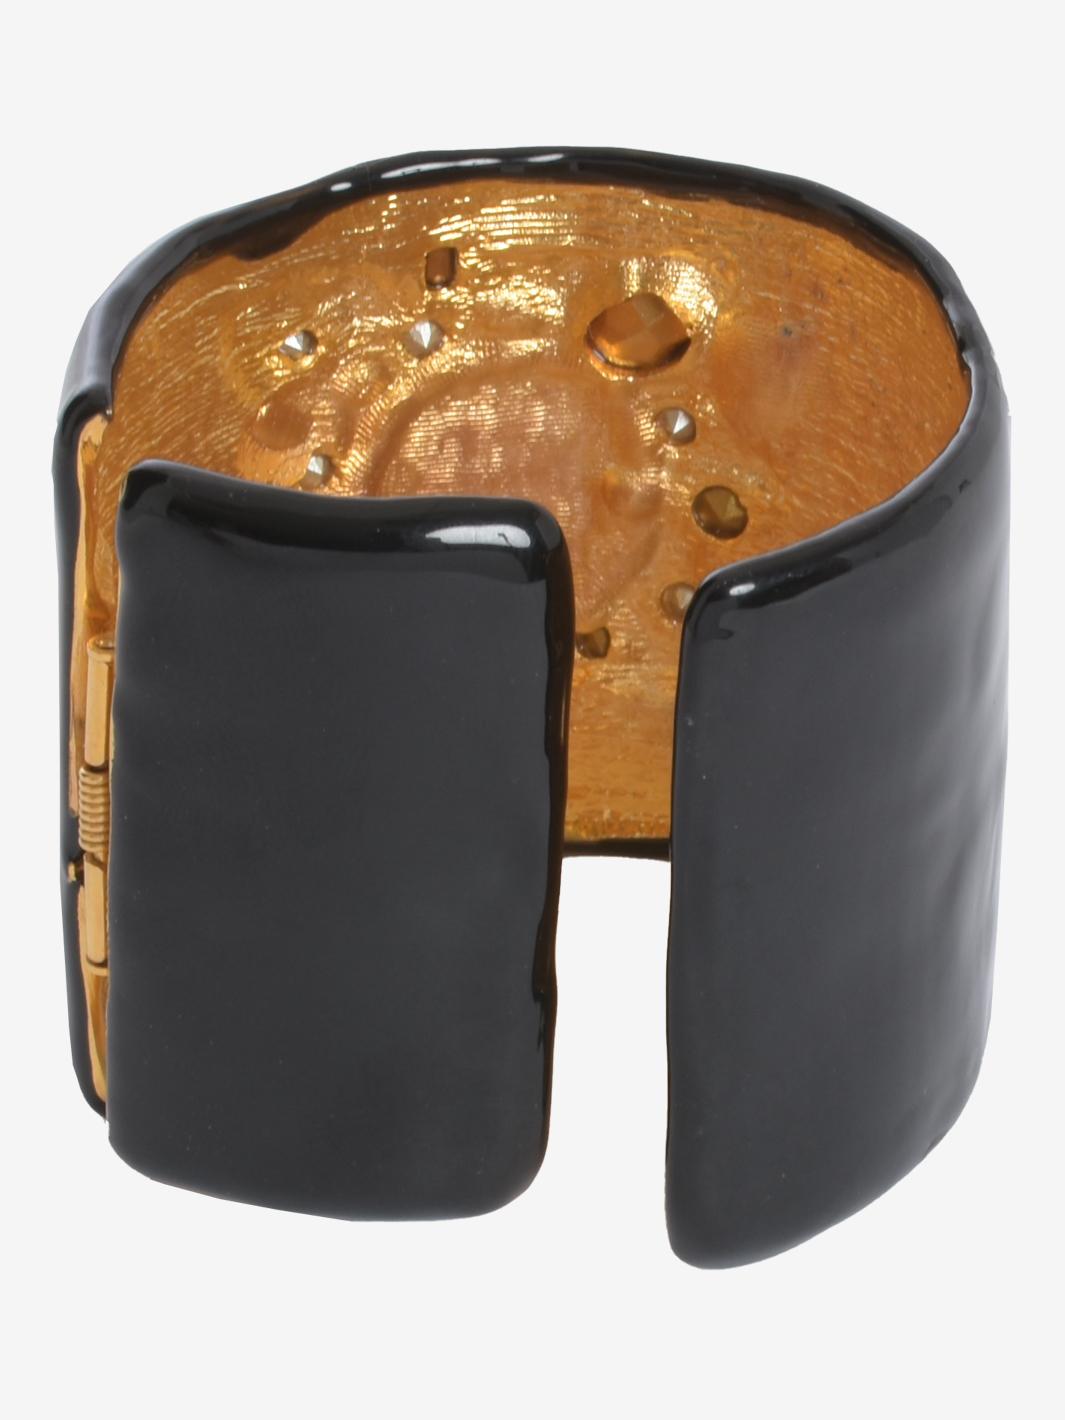 Kenneth Jay Lane Black Large Rigid Band Bracelet With Stones is a unique design much appreciated by Diana Vreeland, which Lane had created for her. Polychrome stones on cast American pewter plated hamilton gold.

STATE OF PRESERVATION
Good